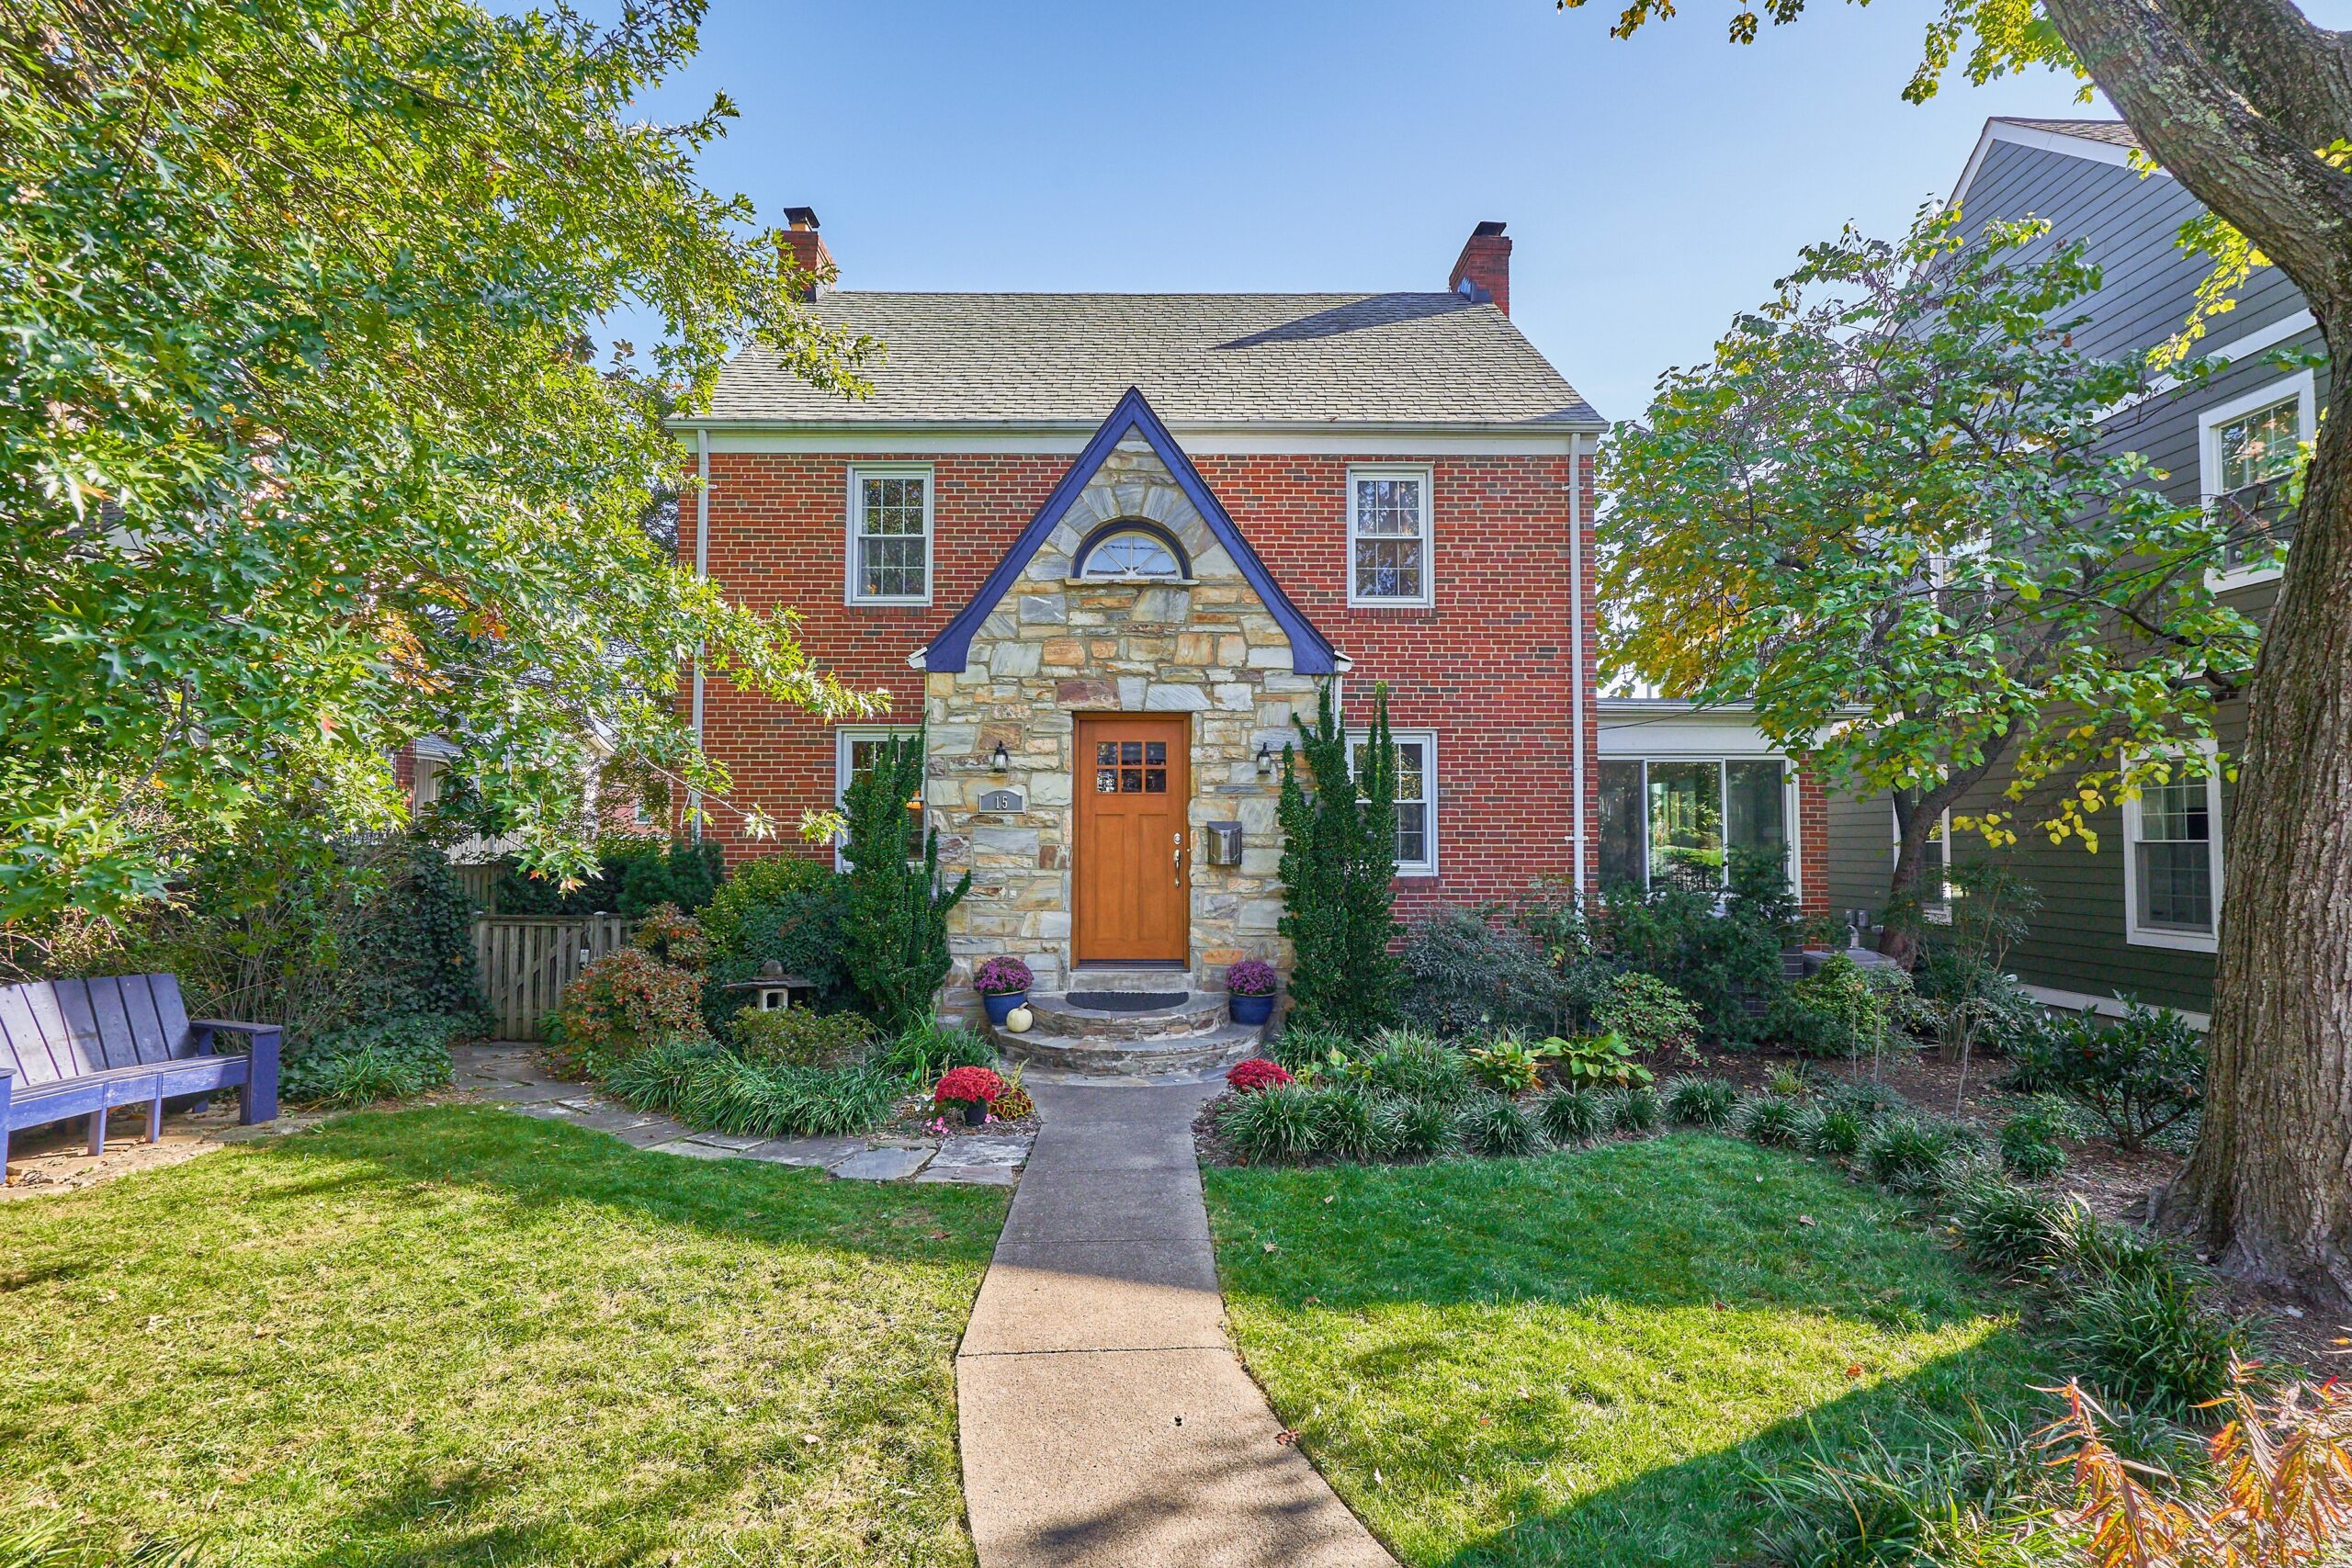 Professional exterior photo of 15 N Fenwick Street - showing front walkway to the front door, stone portico in front of a brick colonial